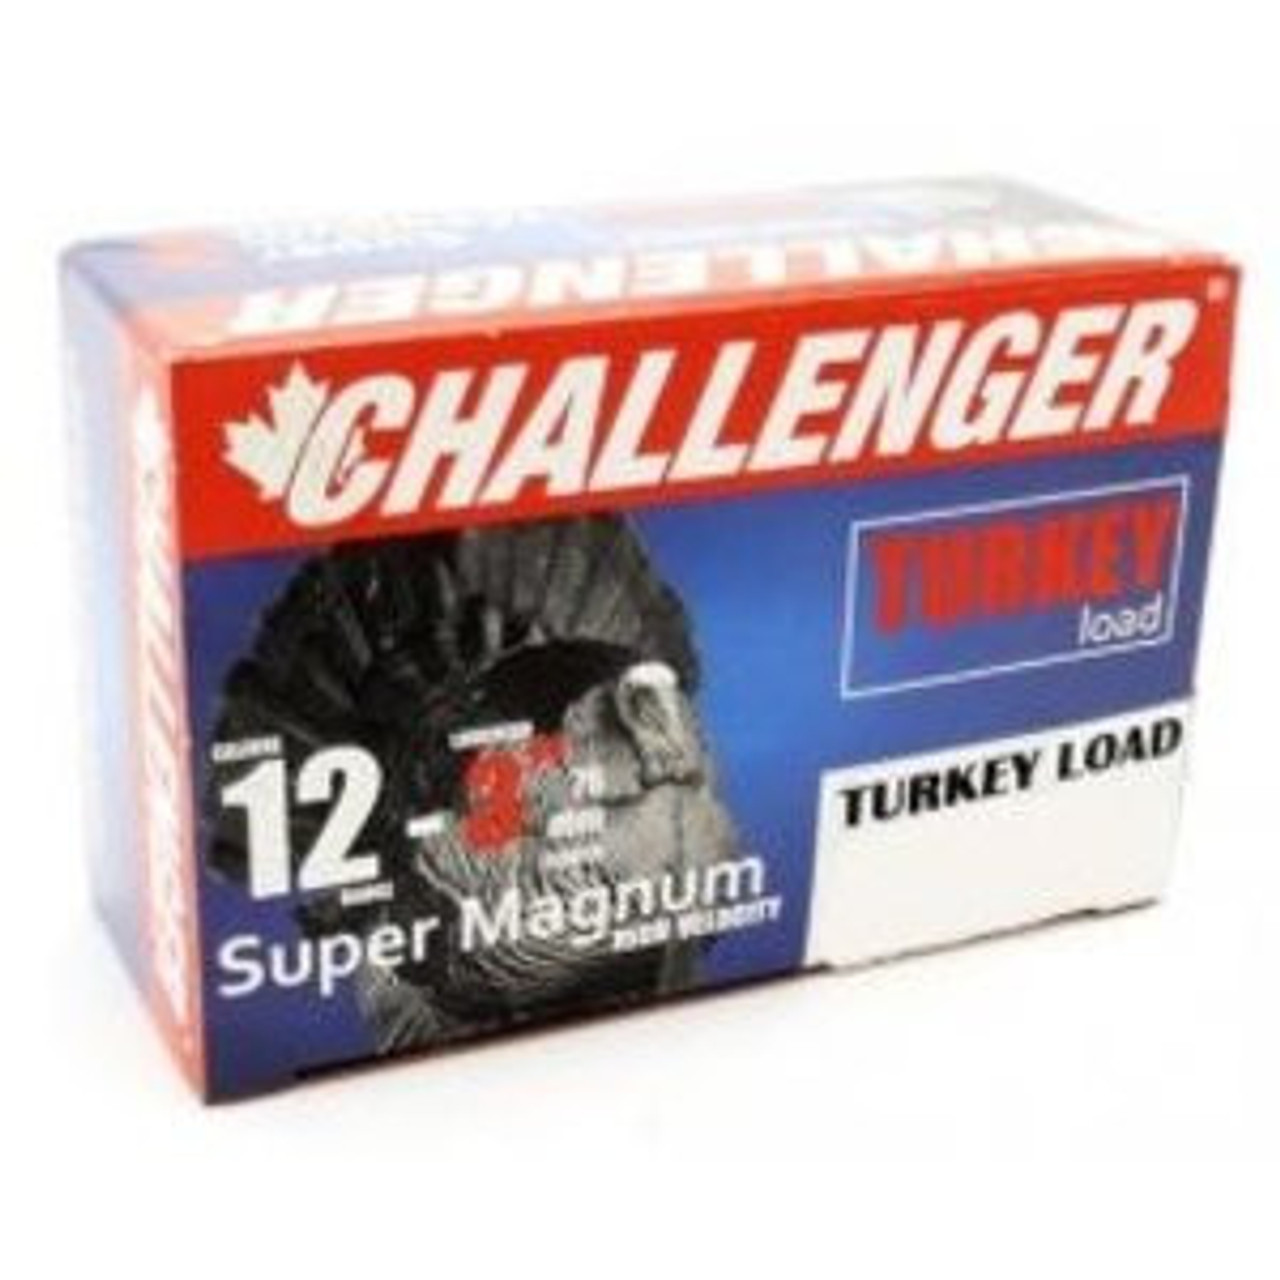 THE CHALLENGER® 12 GA TURKEY LOAD 3"is designed to bring down turkeys with extreme prejudice. Each shell fires 2 oz load of lead shot that leaves the muzzle at 1,250 feet per second and will put down large birds with ease..